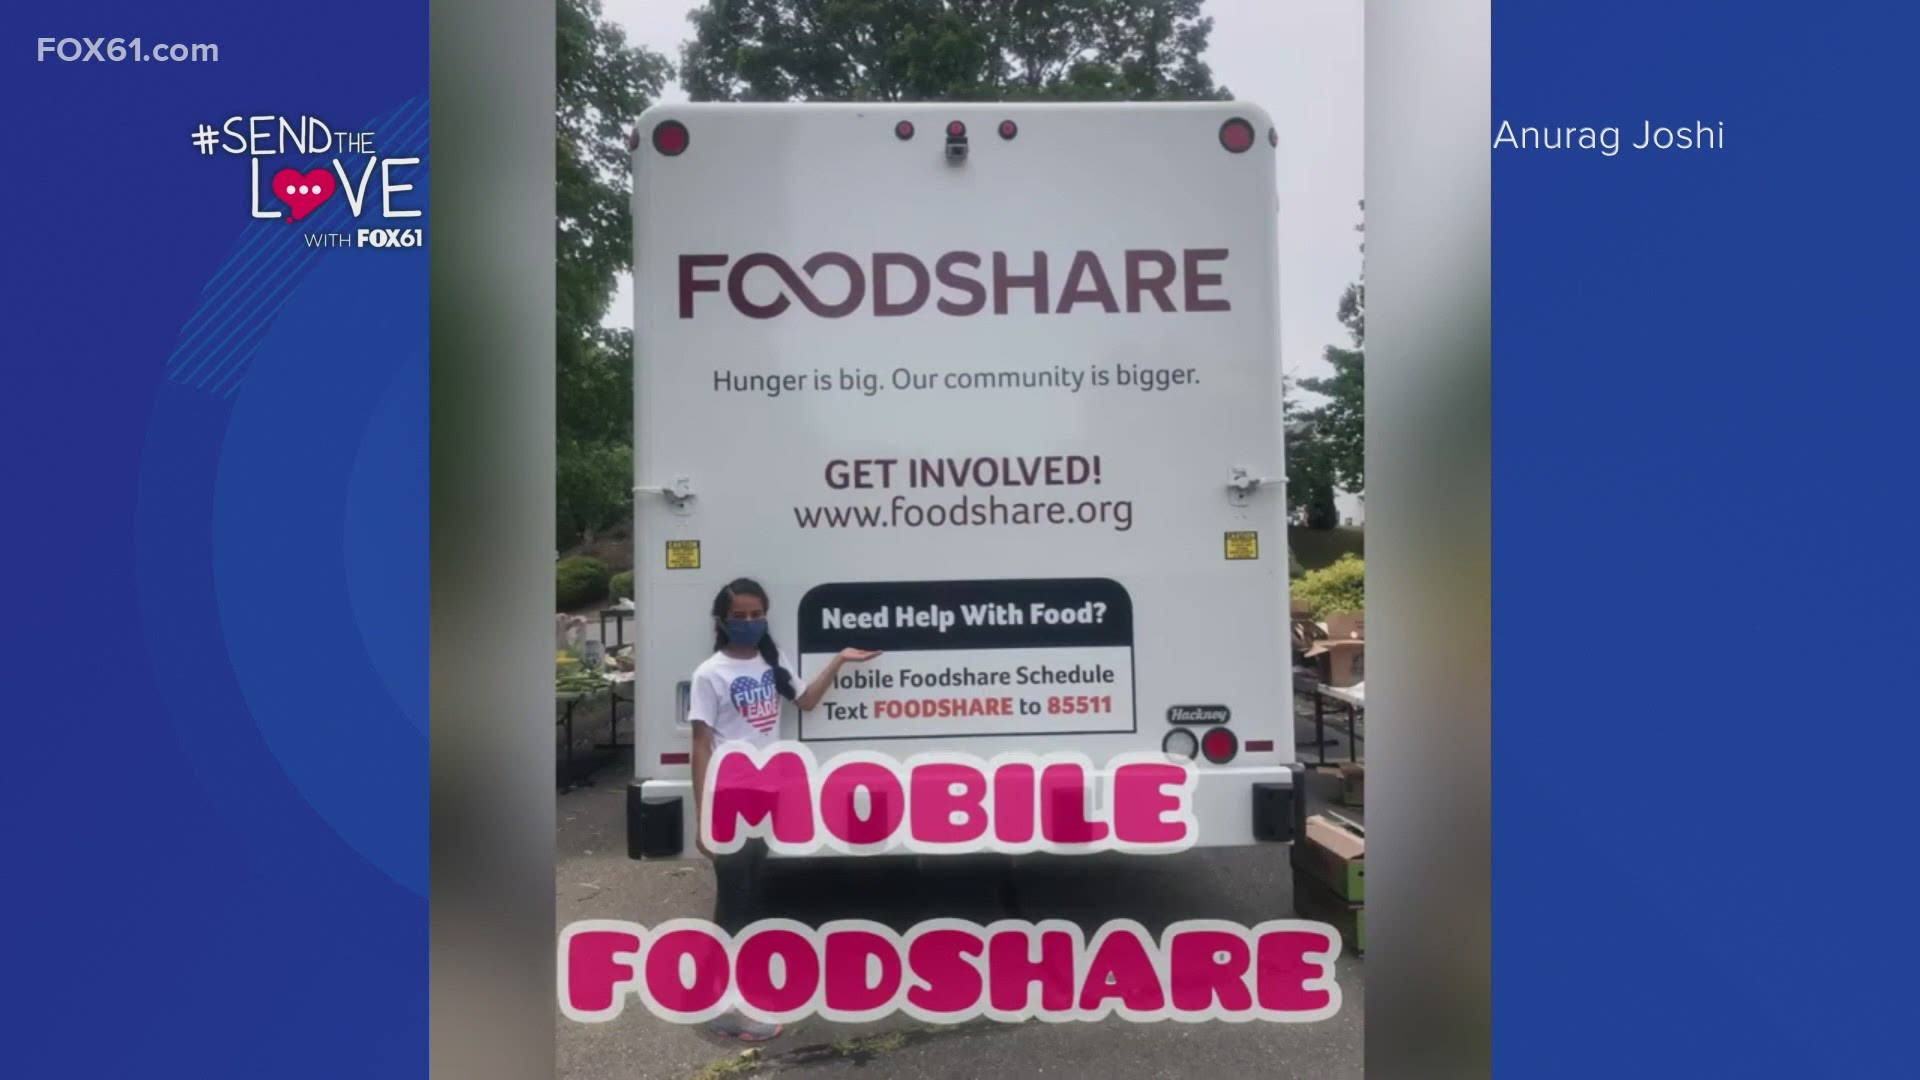 She's become the youngest volunteer at Foodshare